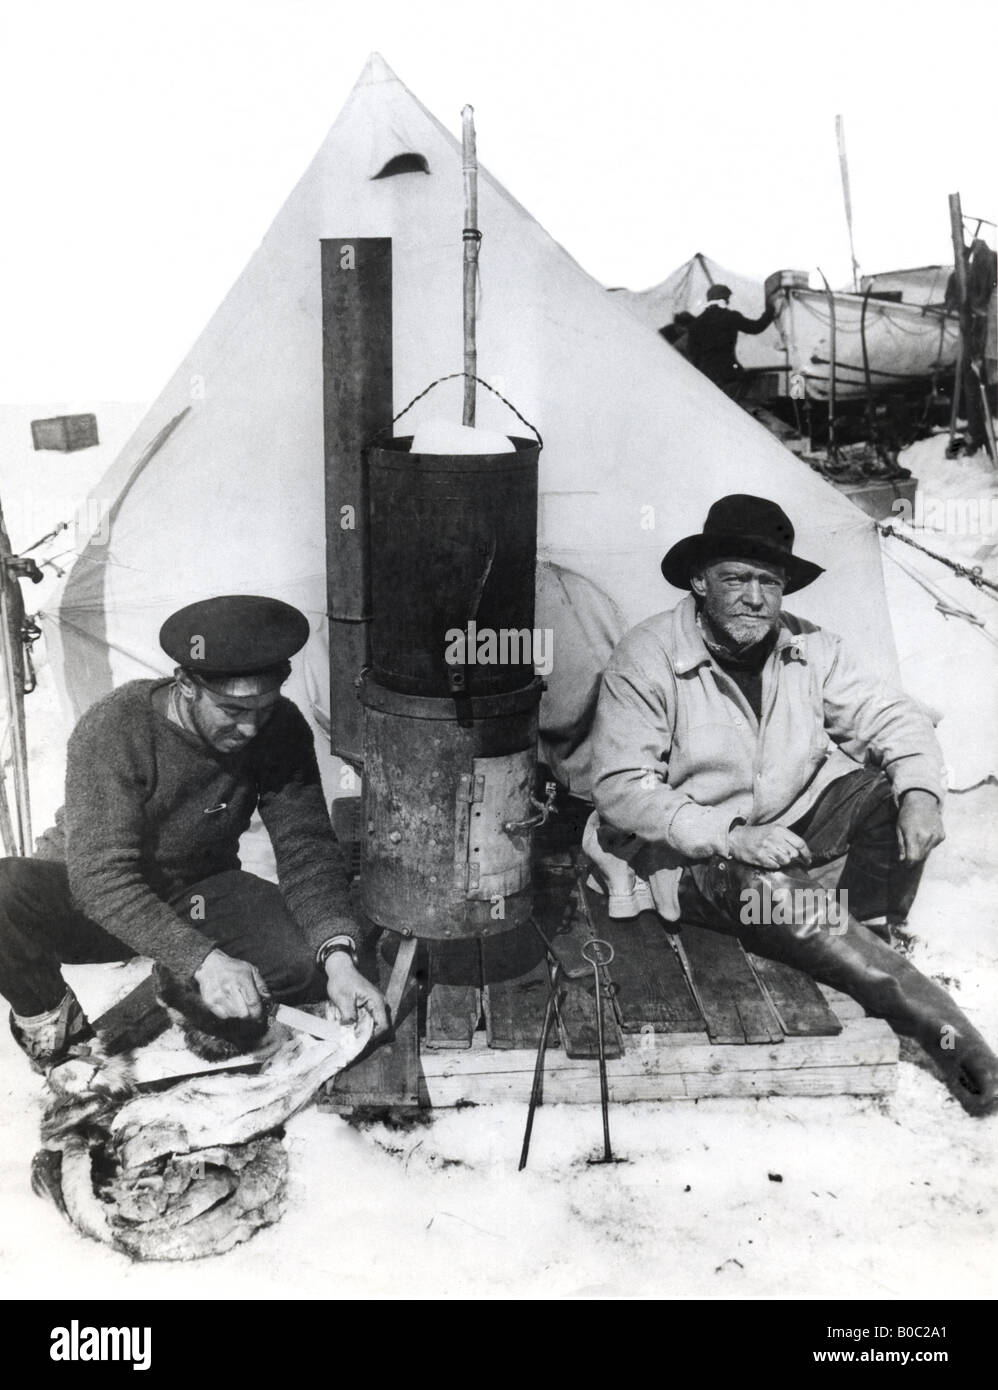 ERNEST SHACKLETON at right with Frank Hurley at Patience Camp  during their expedition to the Antarctic - see Description below Stock Photo